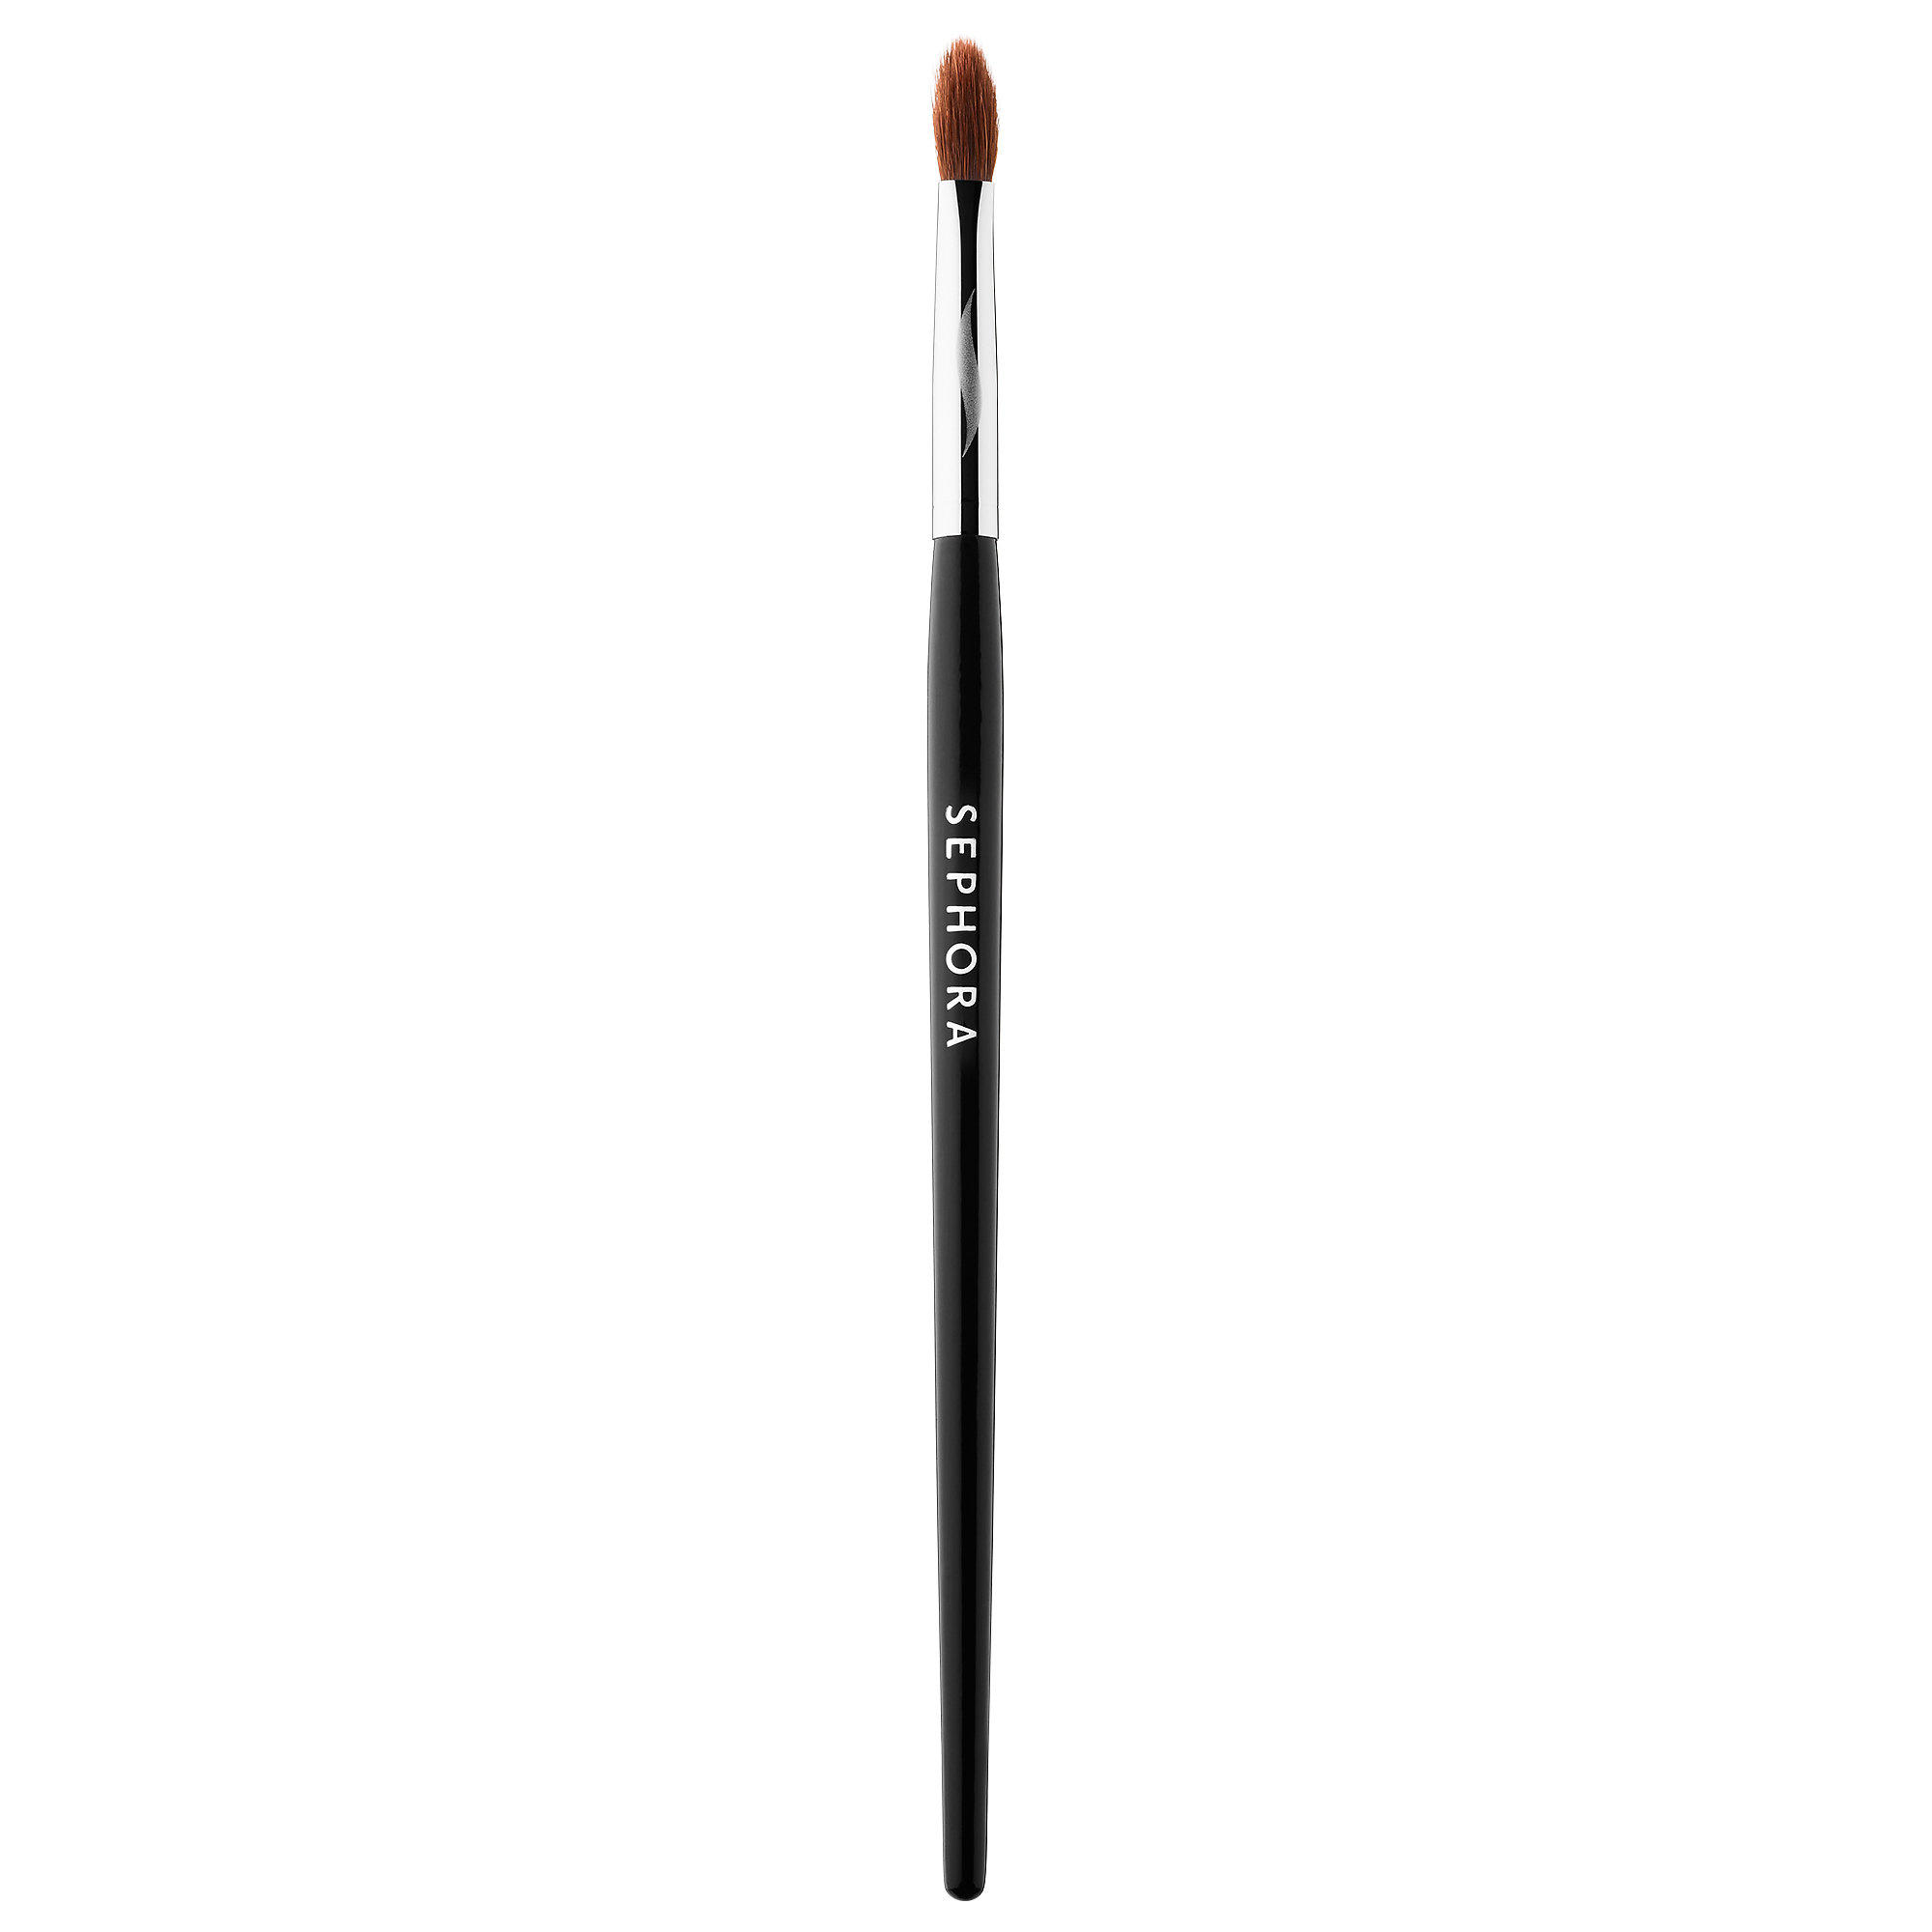 SEPHORA COLLECTION PRO Drawing Shadow Brush #41